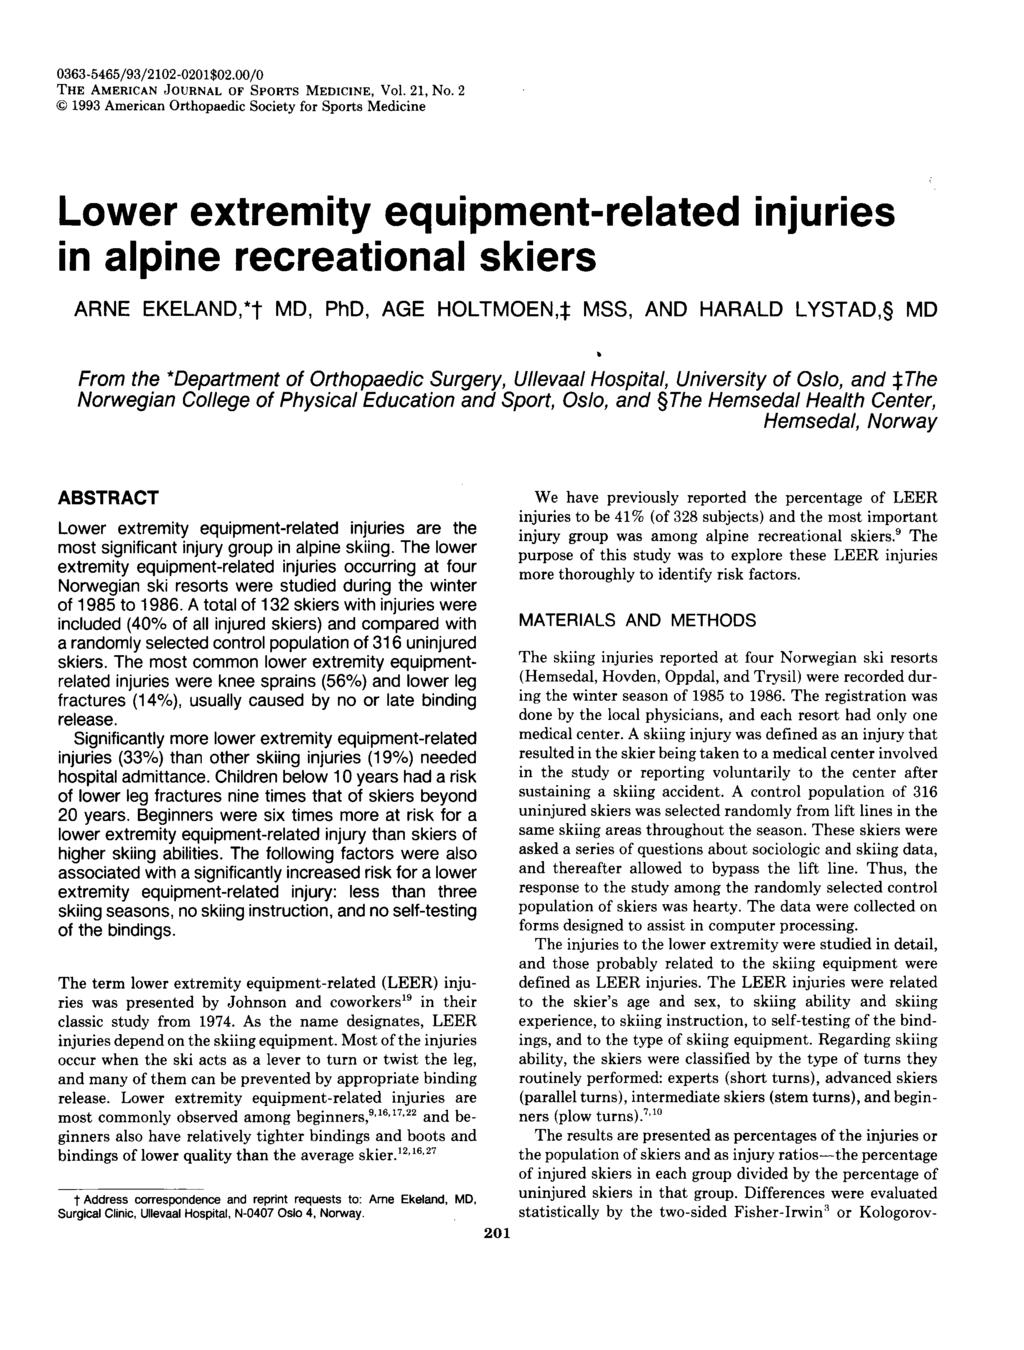 Lower extremity equipment-related injuries in alpine recreational skiers ARNE EKELAND,* MD, PhD, AGE HOLTMOEN, MSS, AND HARALD LYSTAD, MD From the *Department of Orthopaedic Surgery, Ullevaal